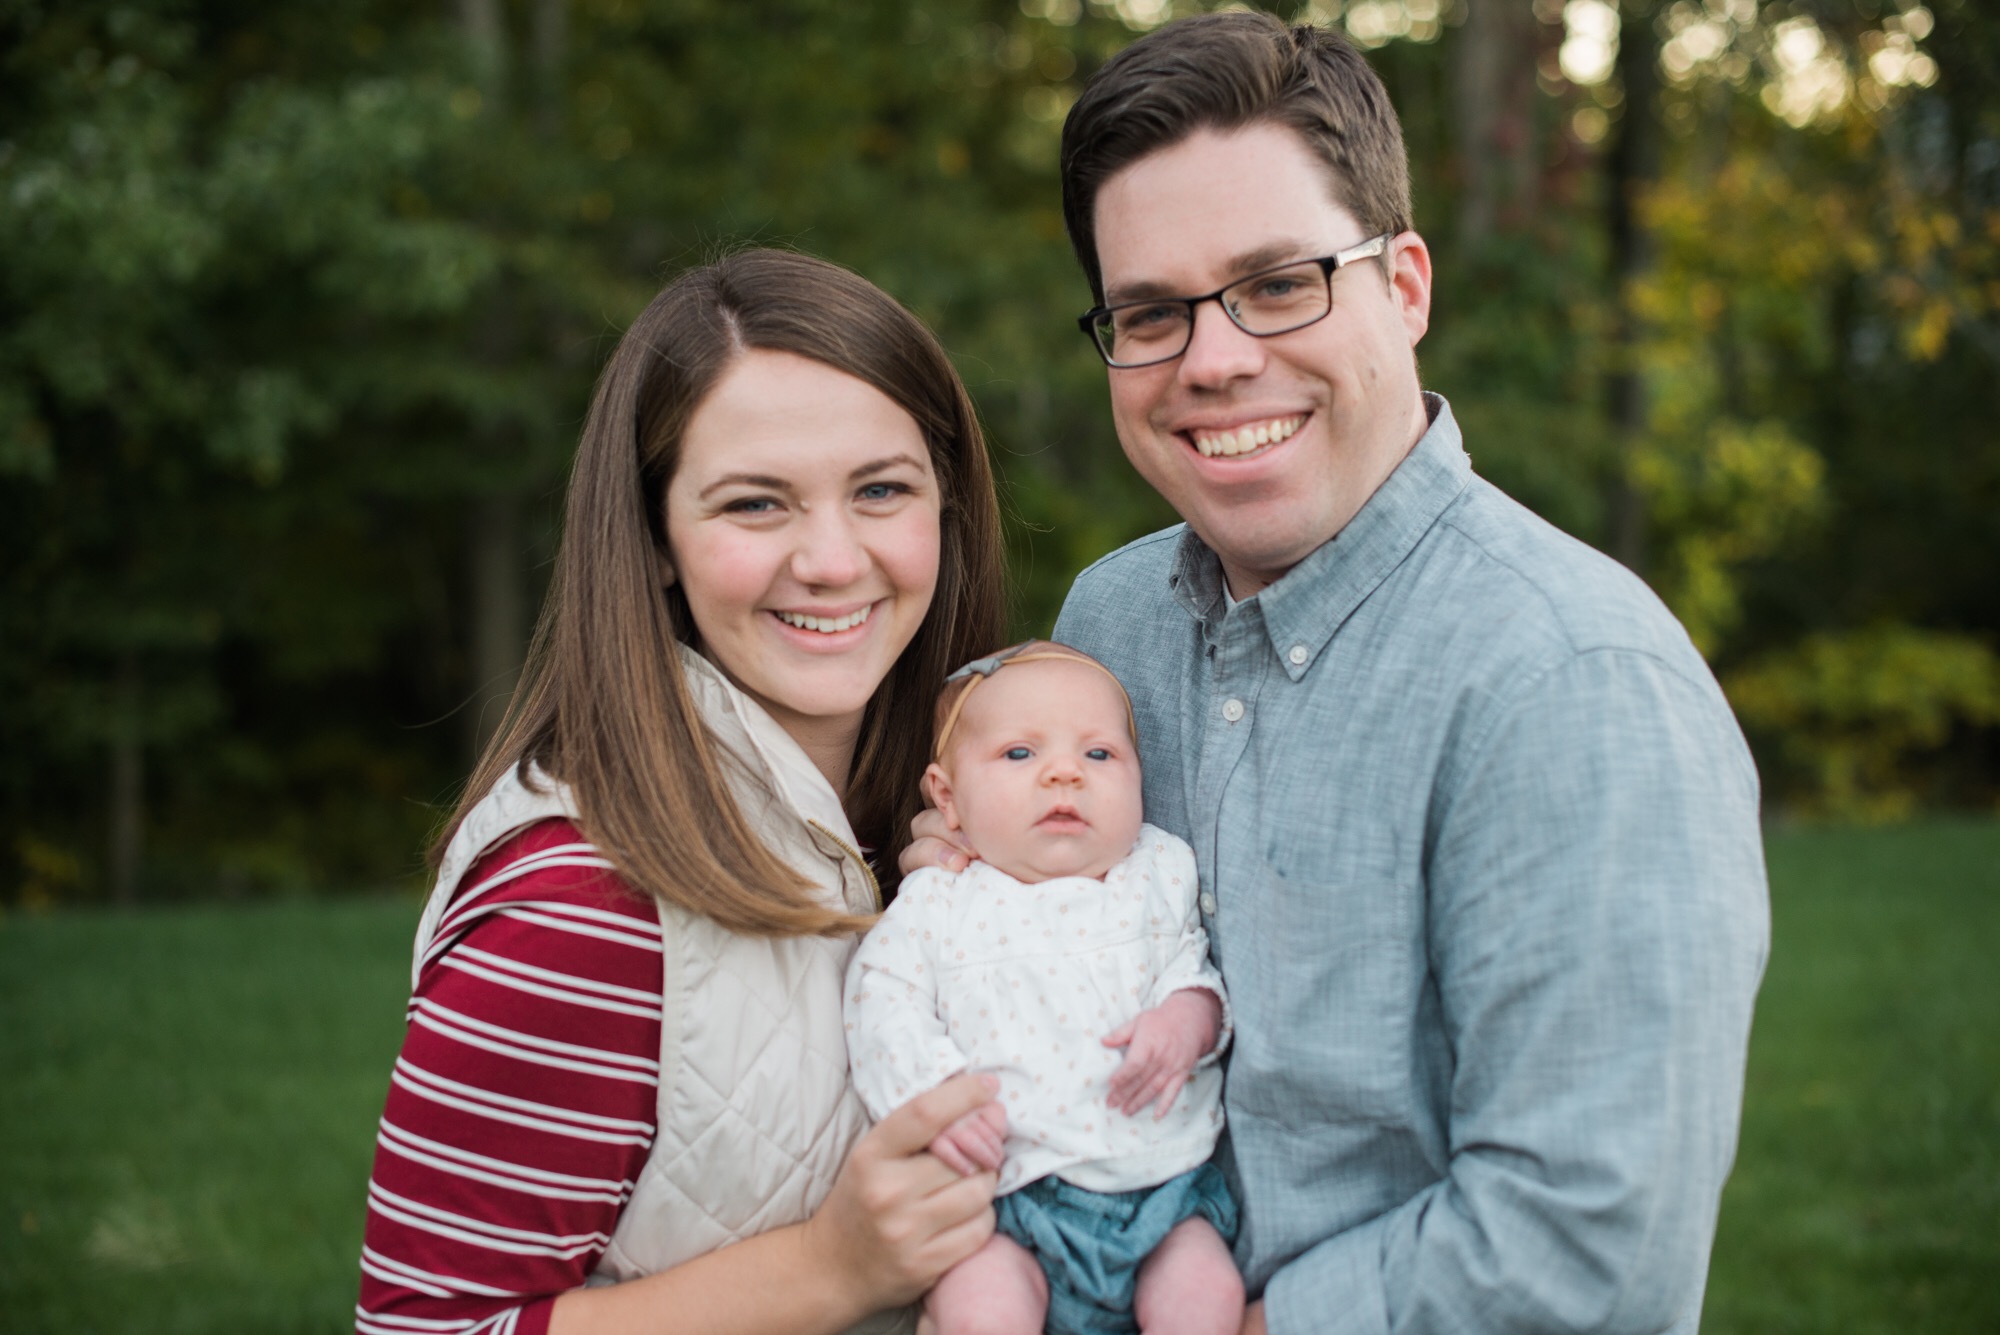 MIT Ph.D. student Ryan Hill (R) with his wife, Sarah Hill, and 14-month-old daughter, Norah. (Courtesy of Sarah Hill)